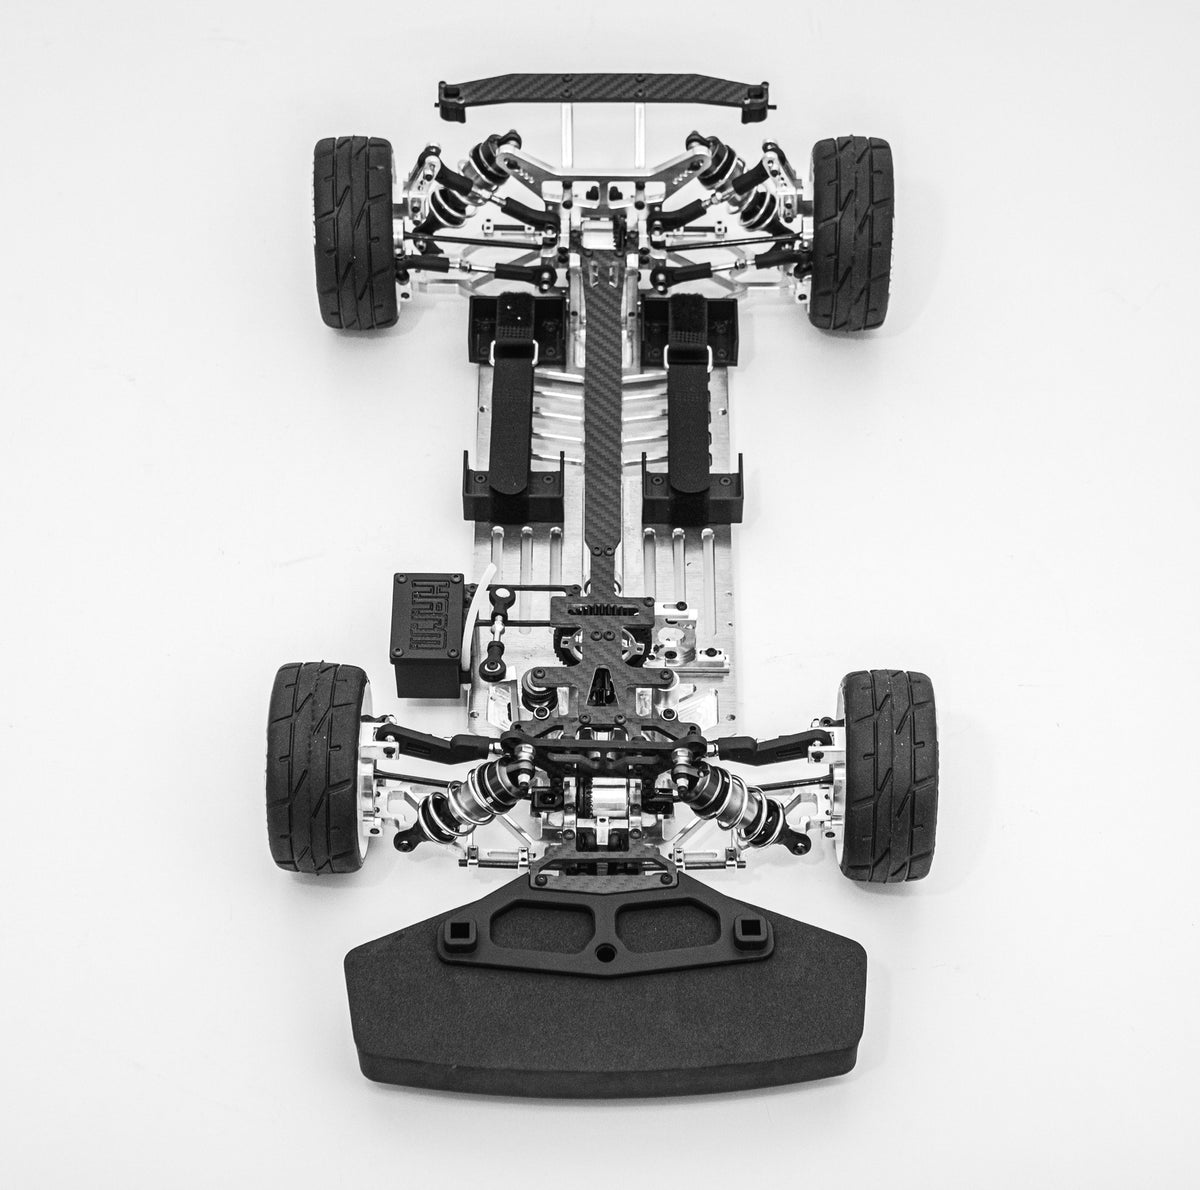 1/8 EGX-1 4WD GT electric chassis kit LWB (long wheelbase 358mm) Available with your choice of bodyshell!